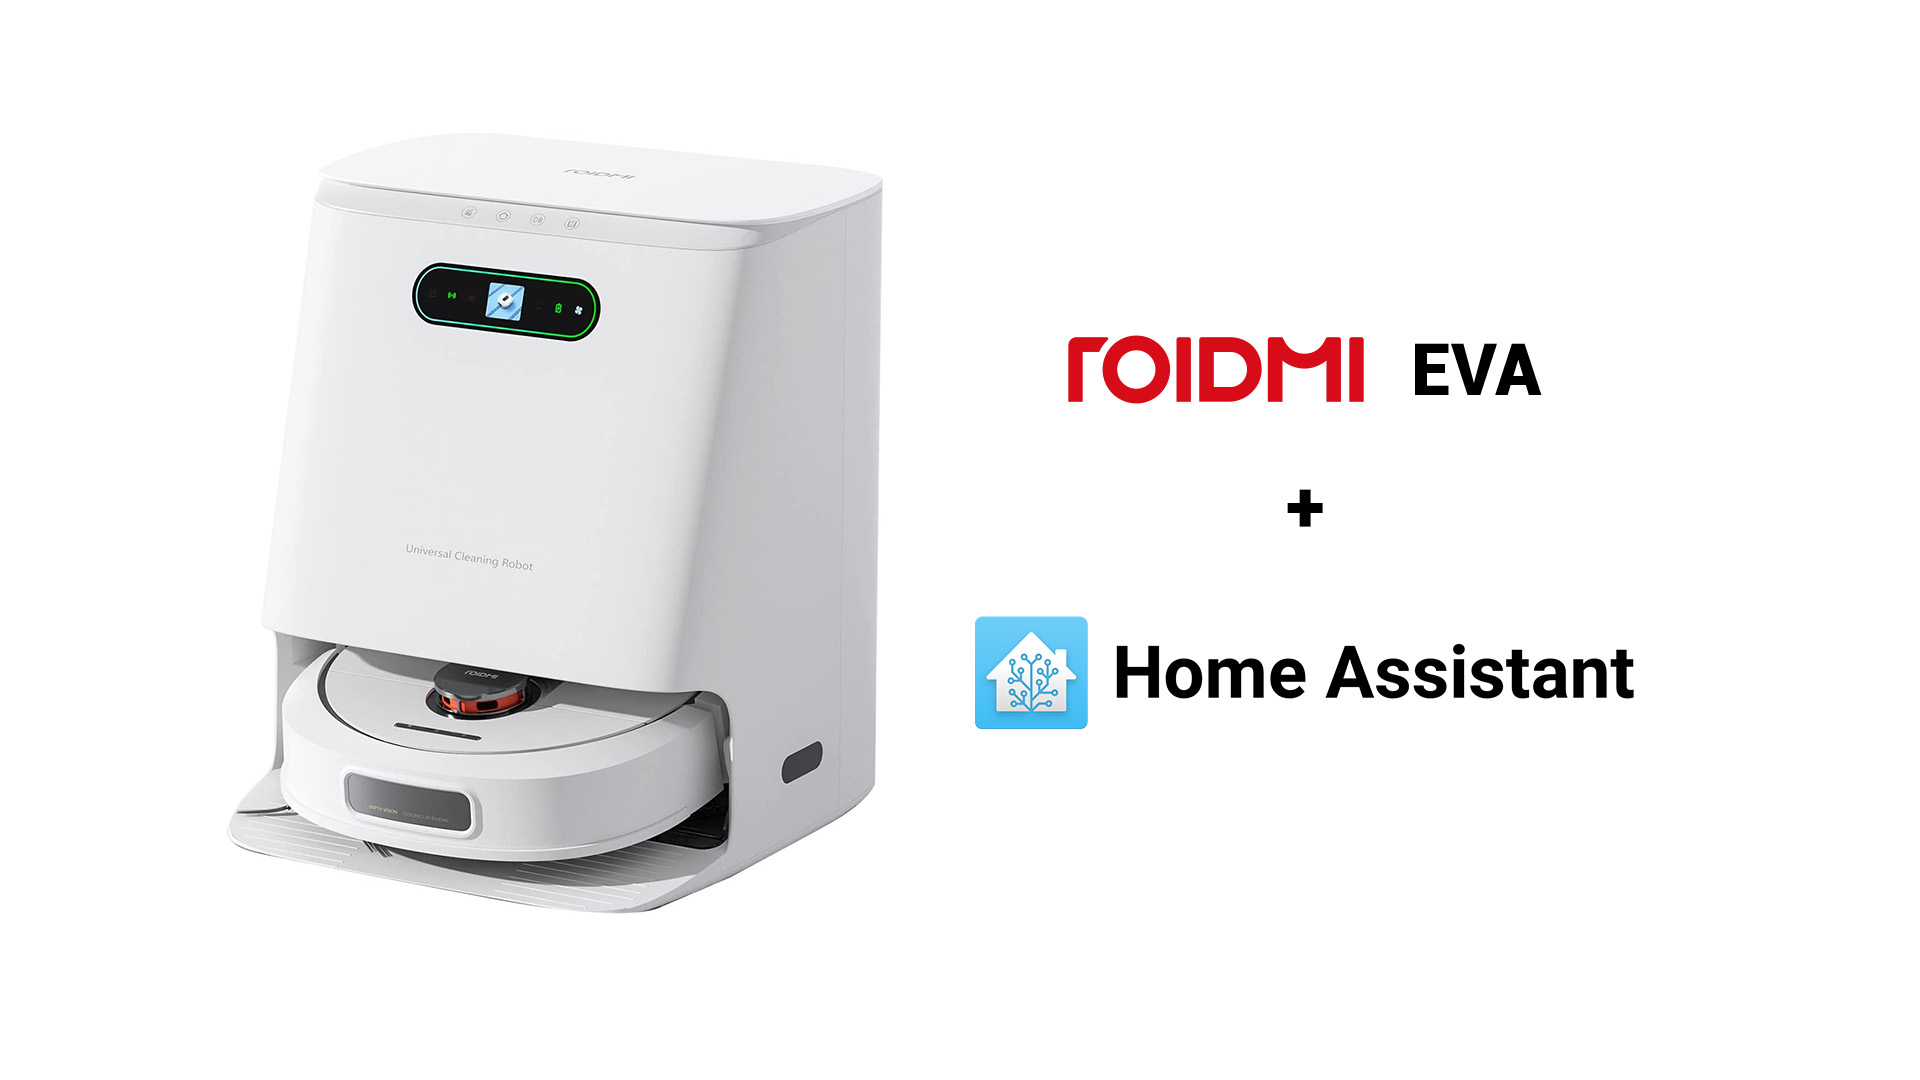 How to integrate Roidmi Eva into Home Assistant